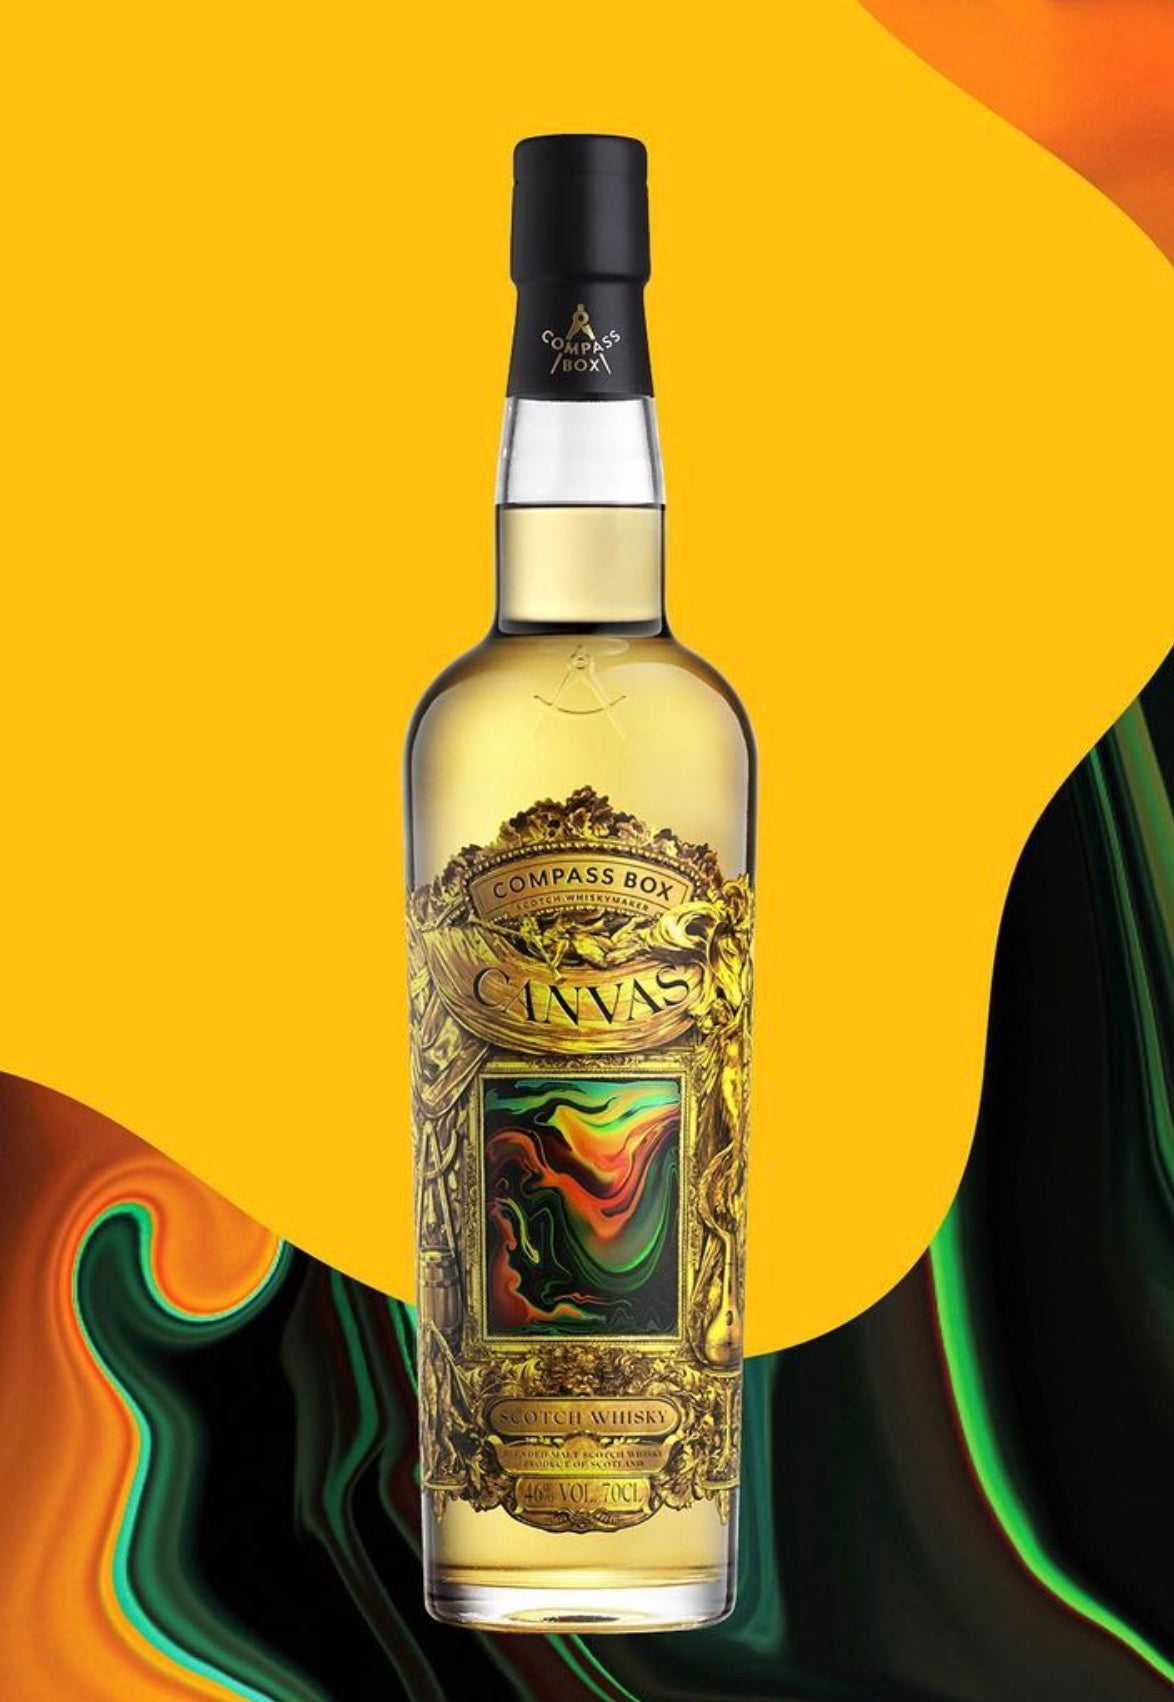 Compass Box Canvas Scotch Whisky Limited Edition